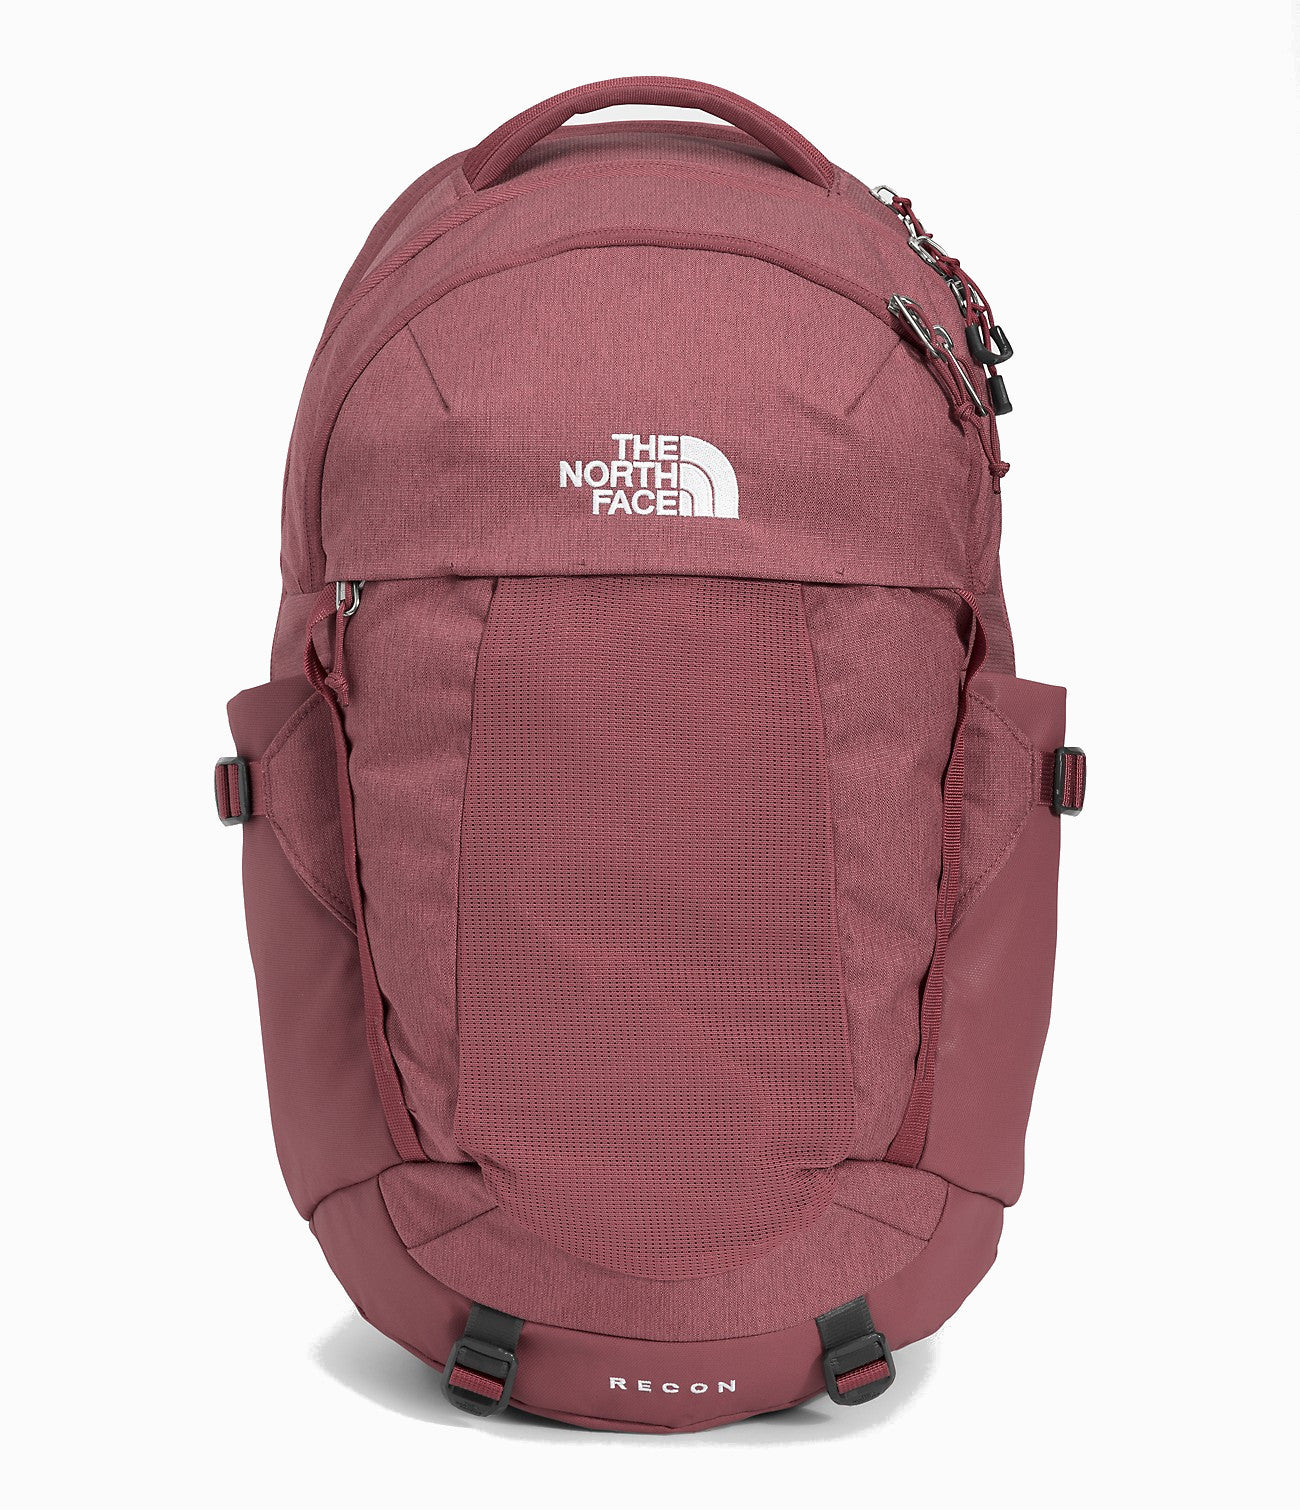 The North Face Women's Recon Backpack Accessories North Face Wild Ginger Light Heather/TNF White-8H4  